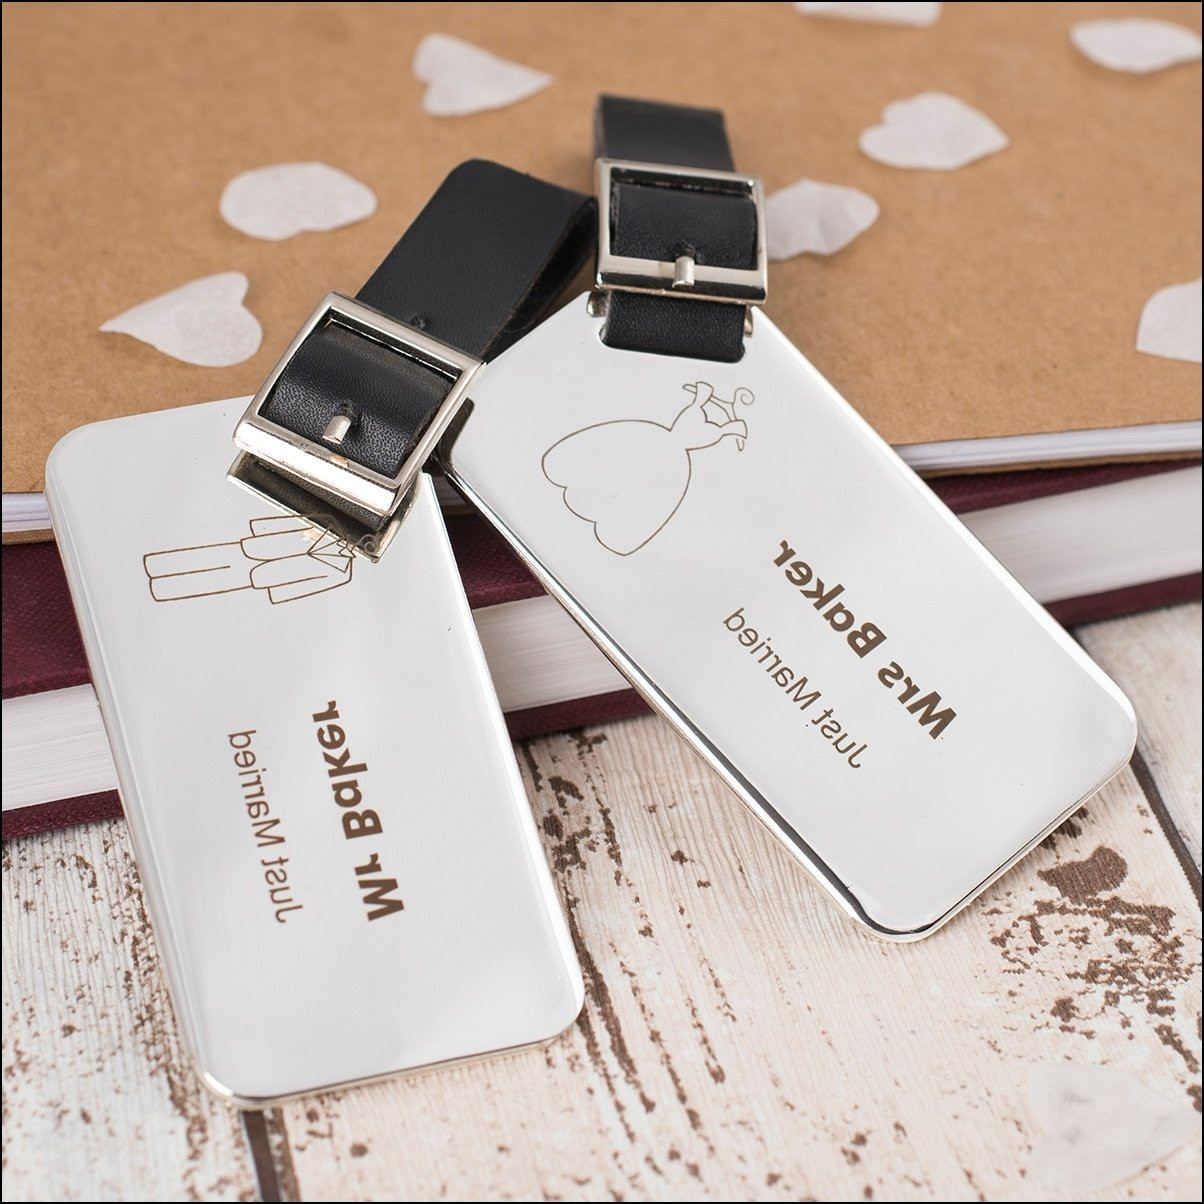 Wedding Gift Ideas For Couple Who Have Everything
 10 Trendy Gift Ideas For Couples Who Have Everything 2020